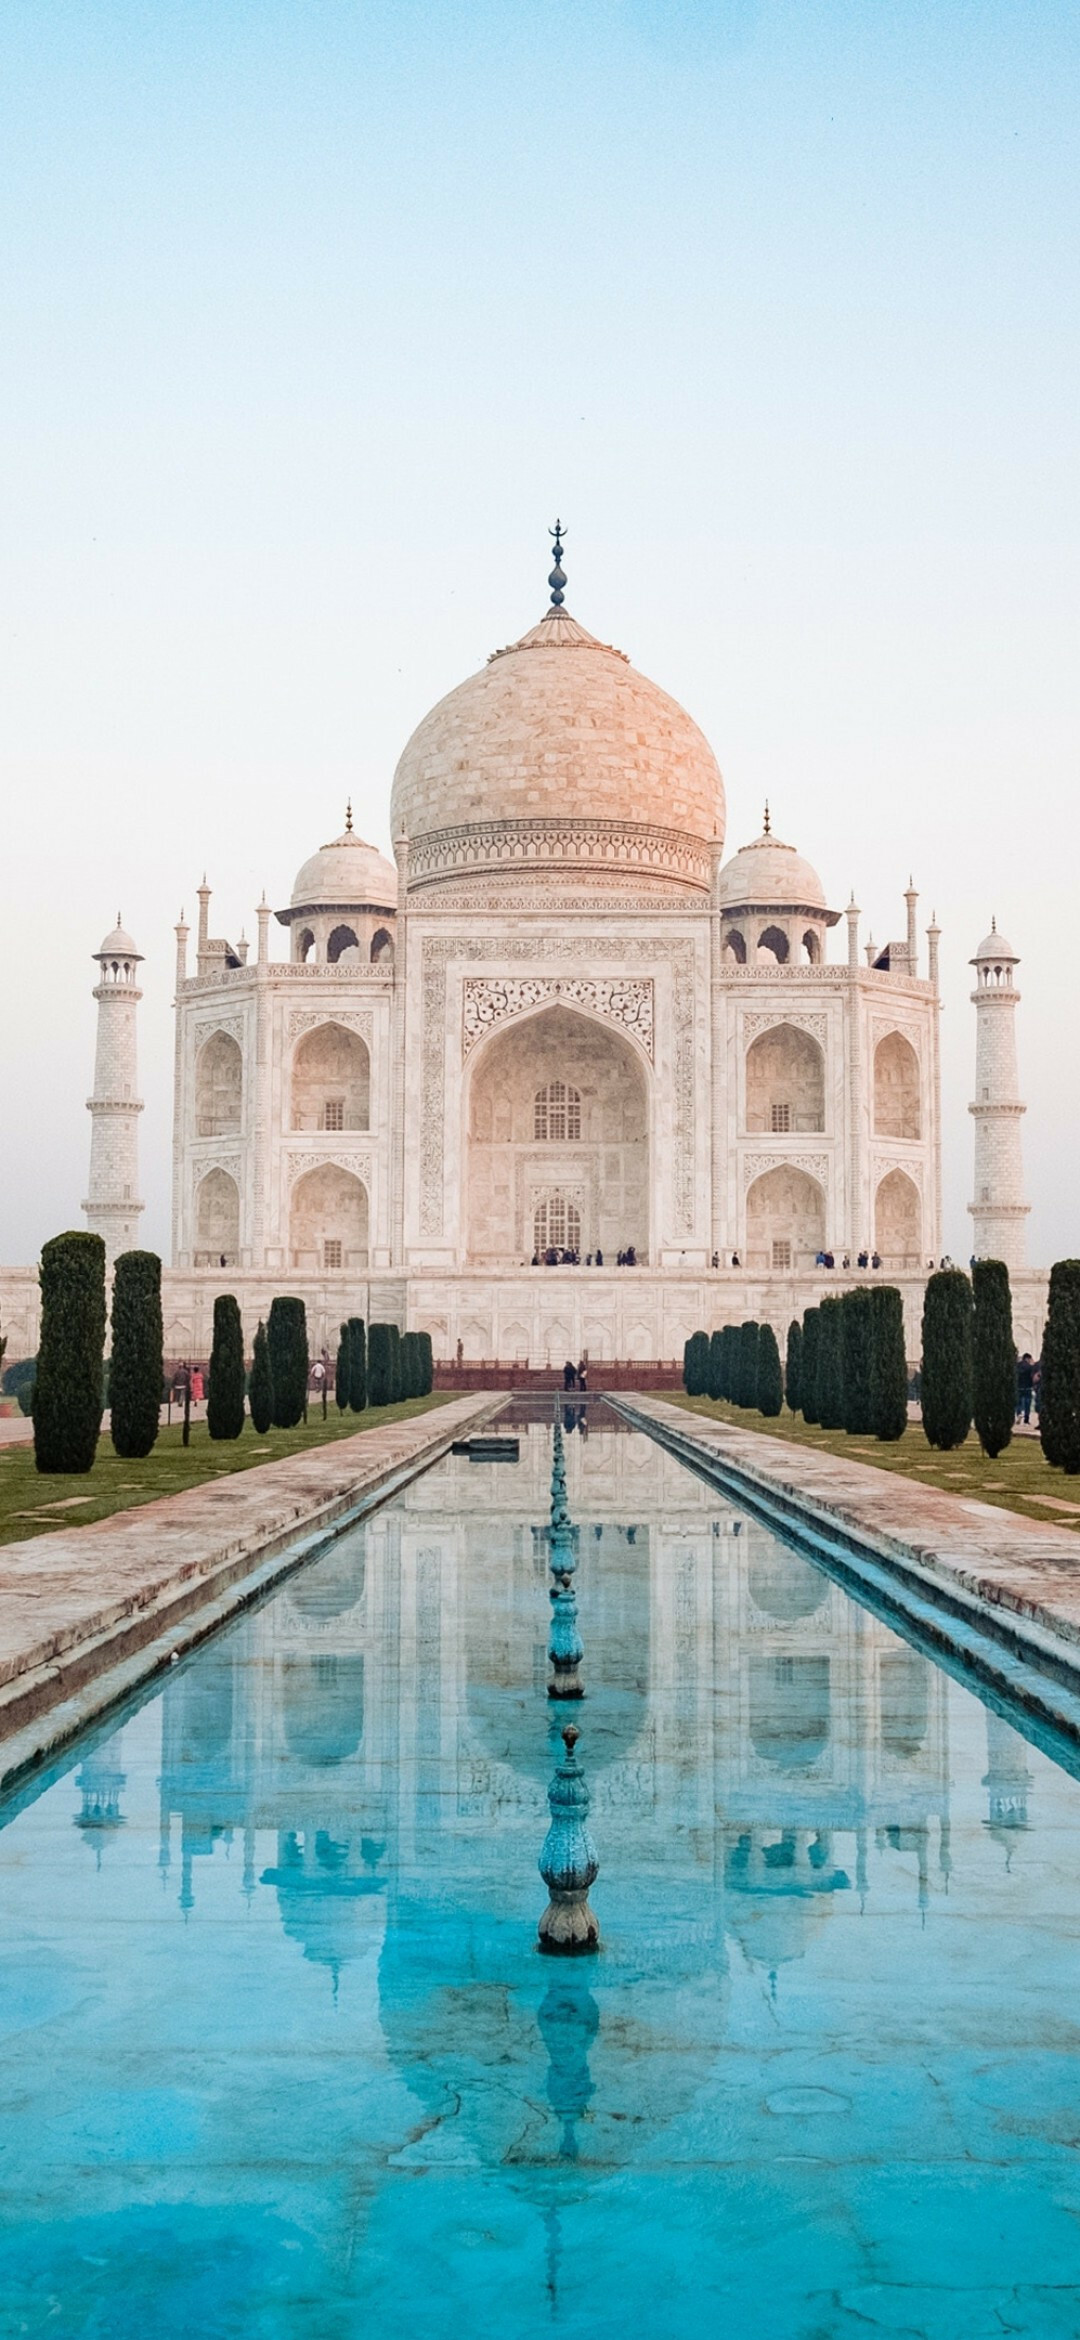 India: Taj Mahal, The mausoleum built by Shah Jahan in the 17th century. 1080x2340 HD Background.